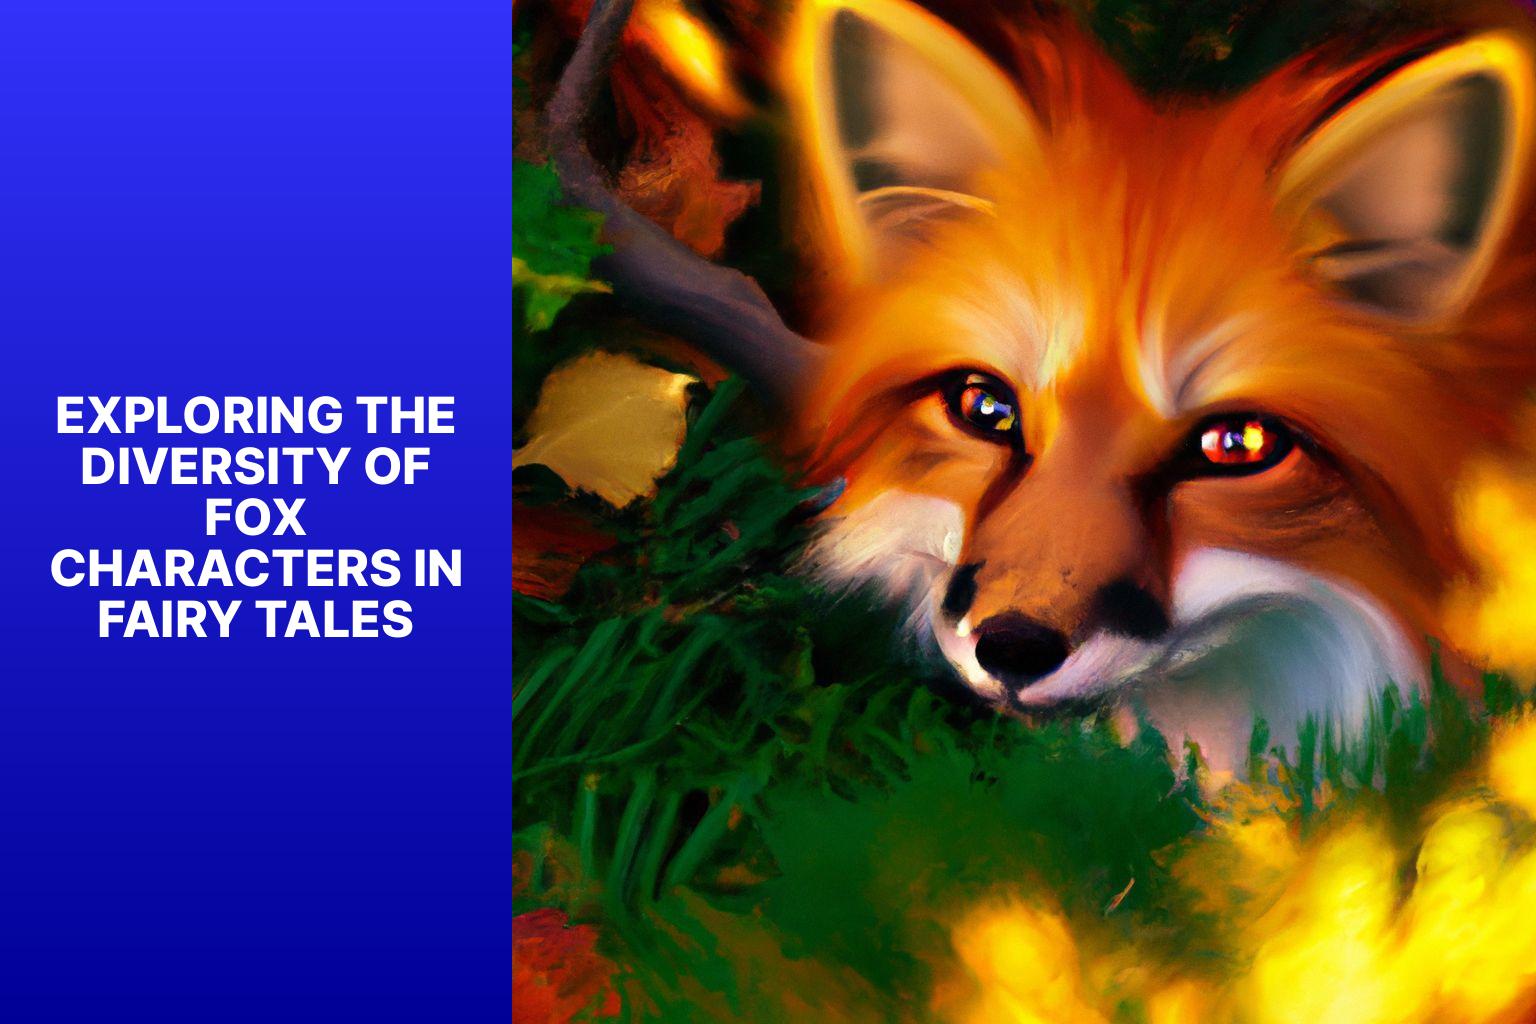 Exploring the Diversity of Fox Characters in Fairy Tales - Fox Myths in Fairy Tales 